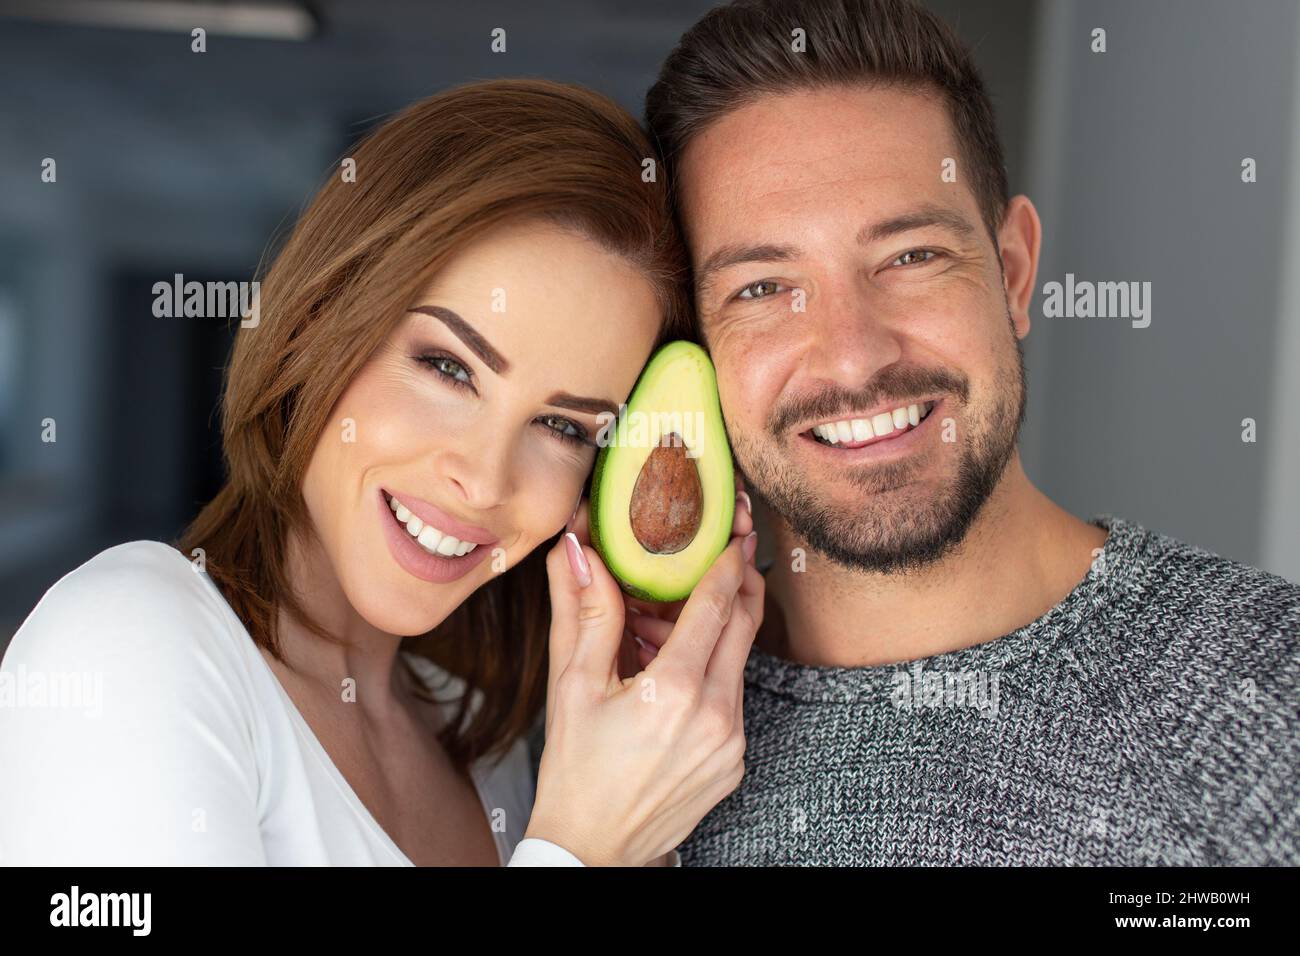 Happy young Caucasian couple holding avocado at face portrait Stock Photo